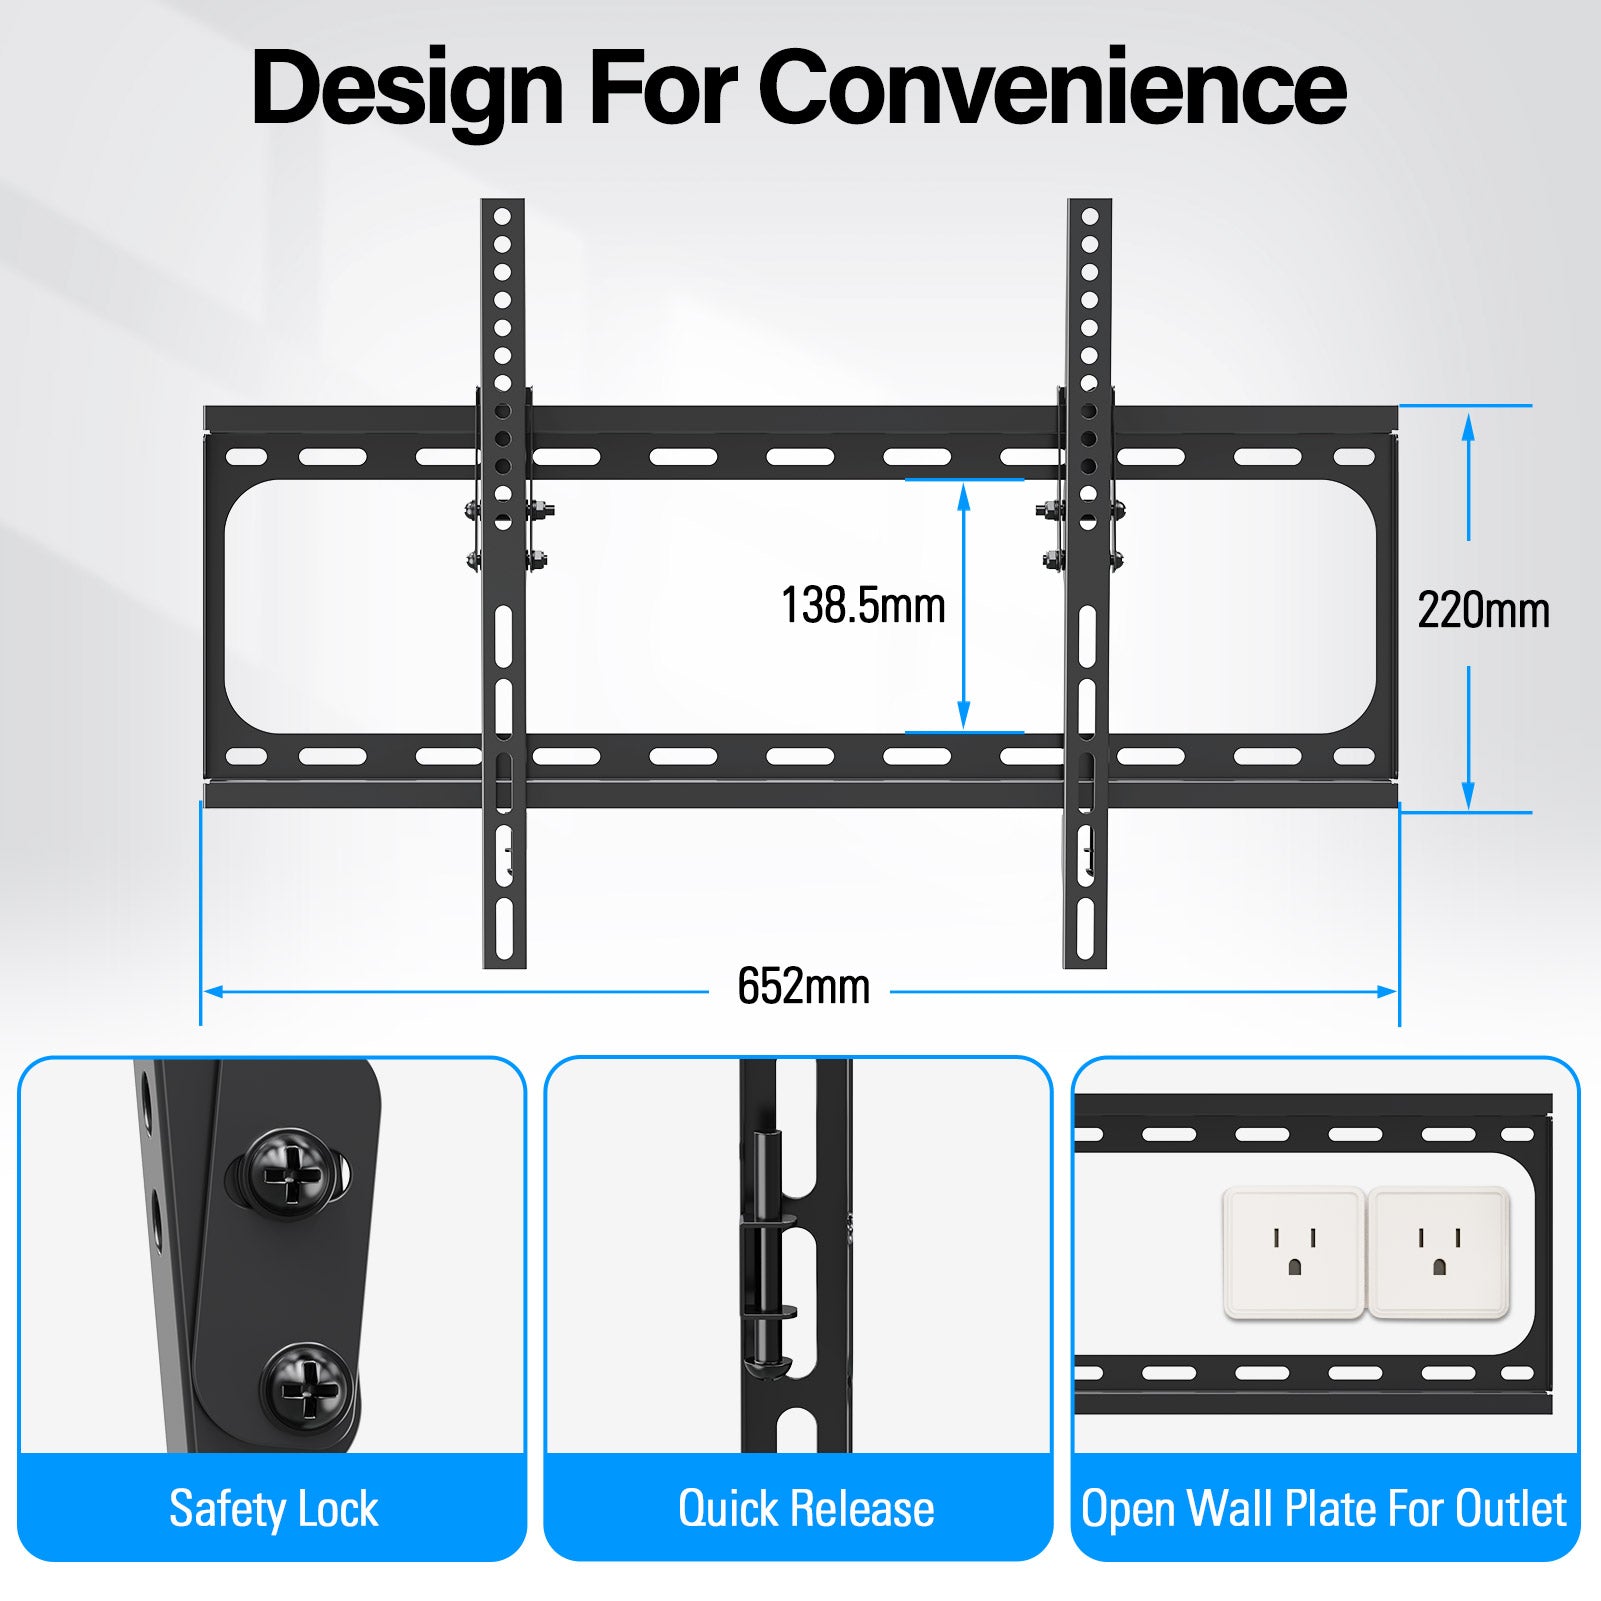 Tilting TV Wall Mount for Up To 86" Tvs MUT0053